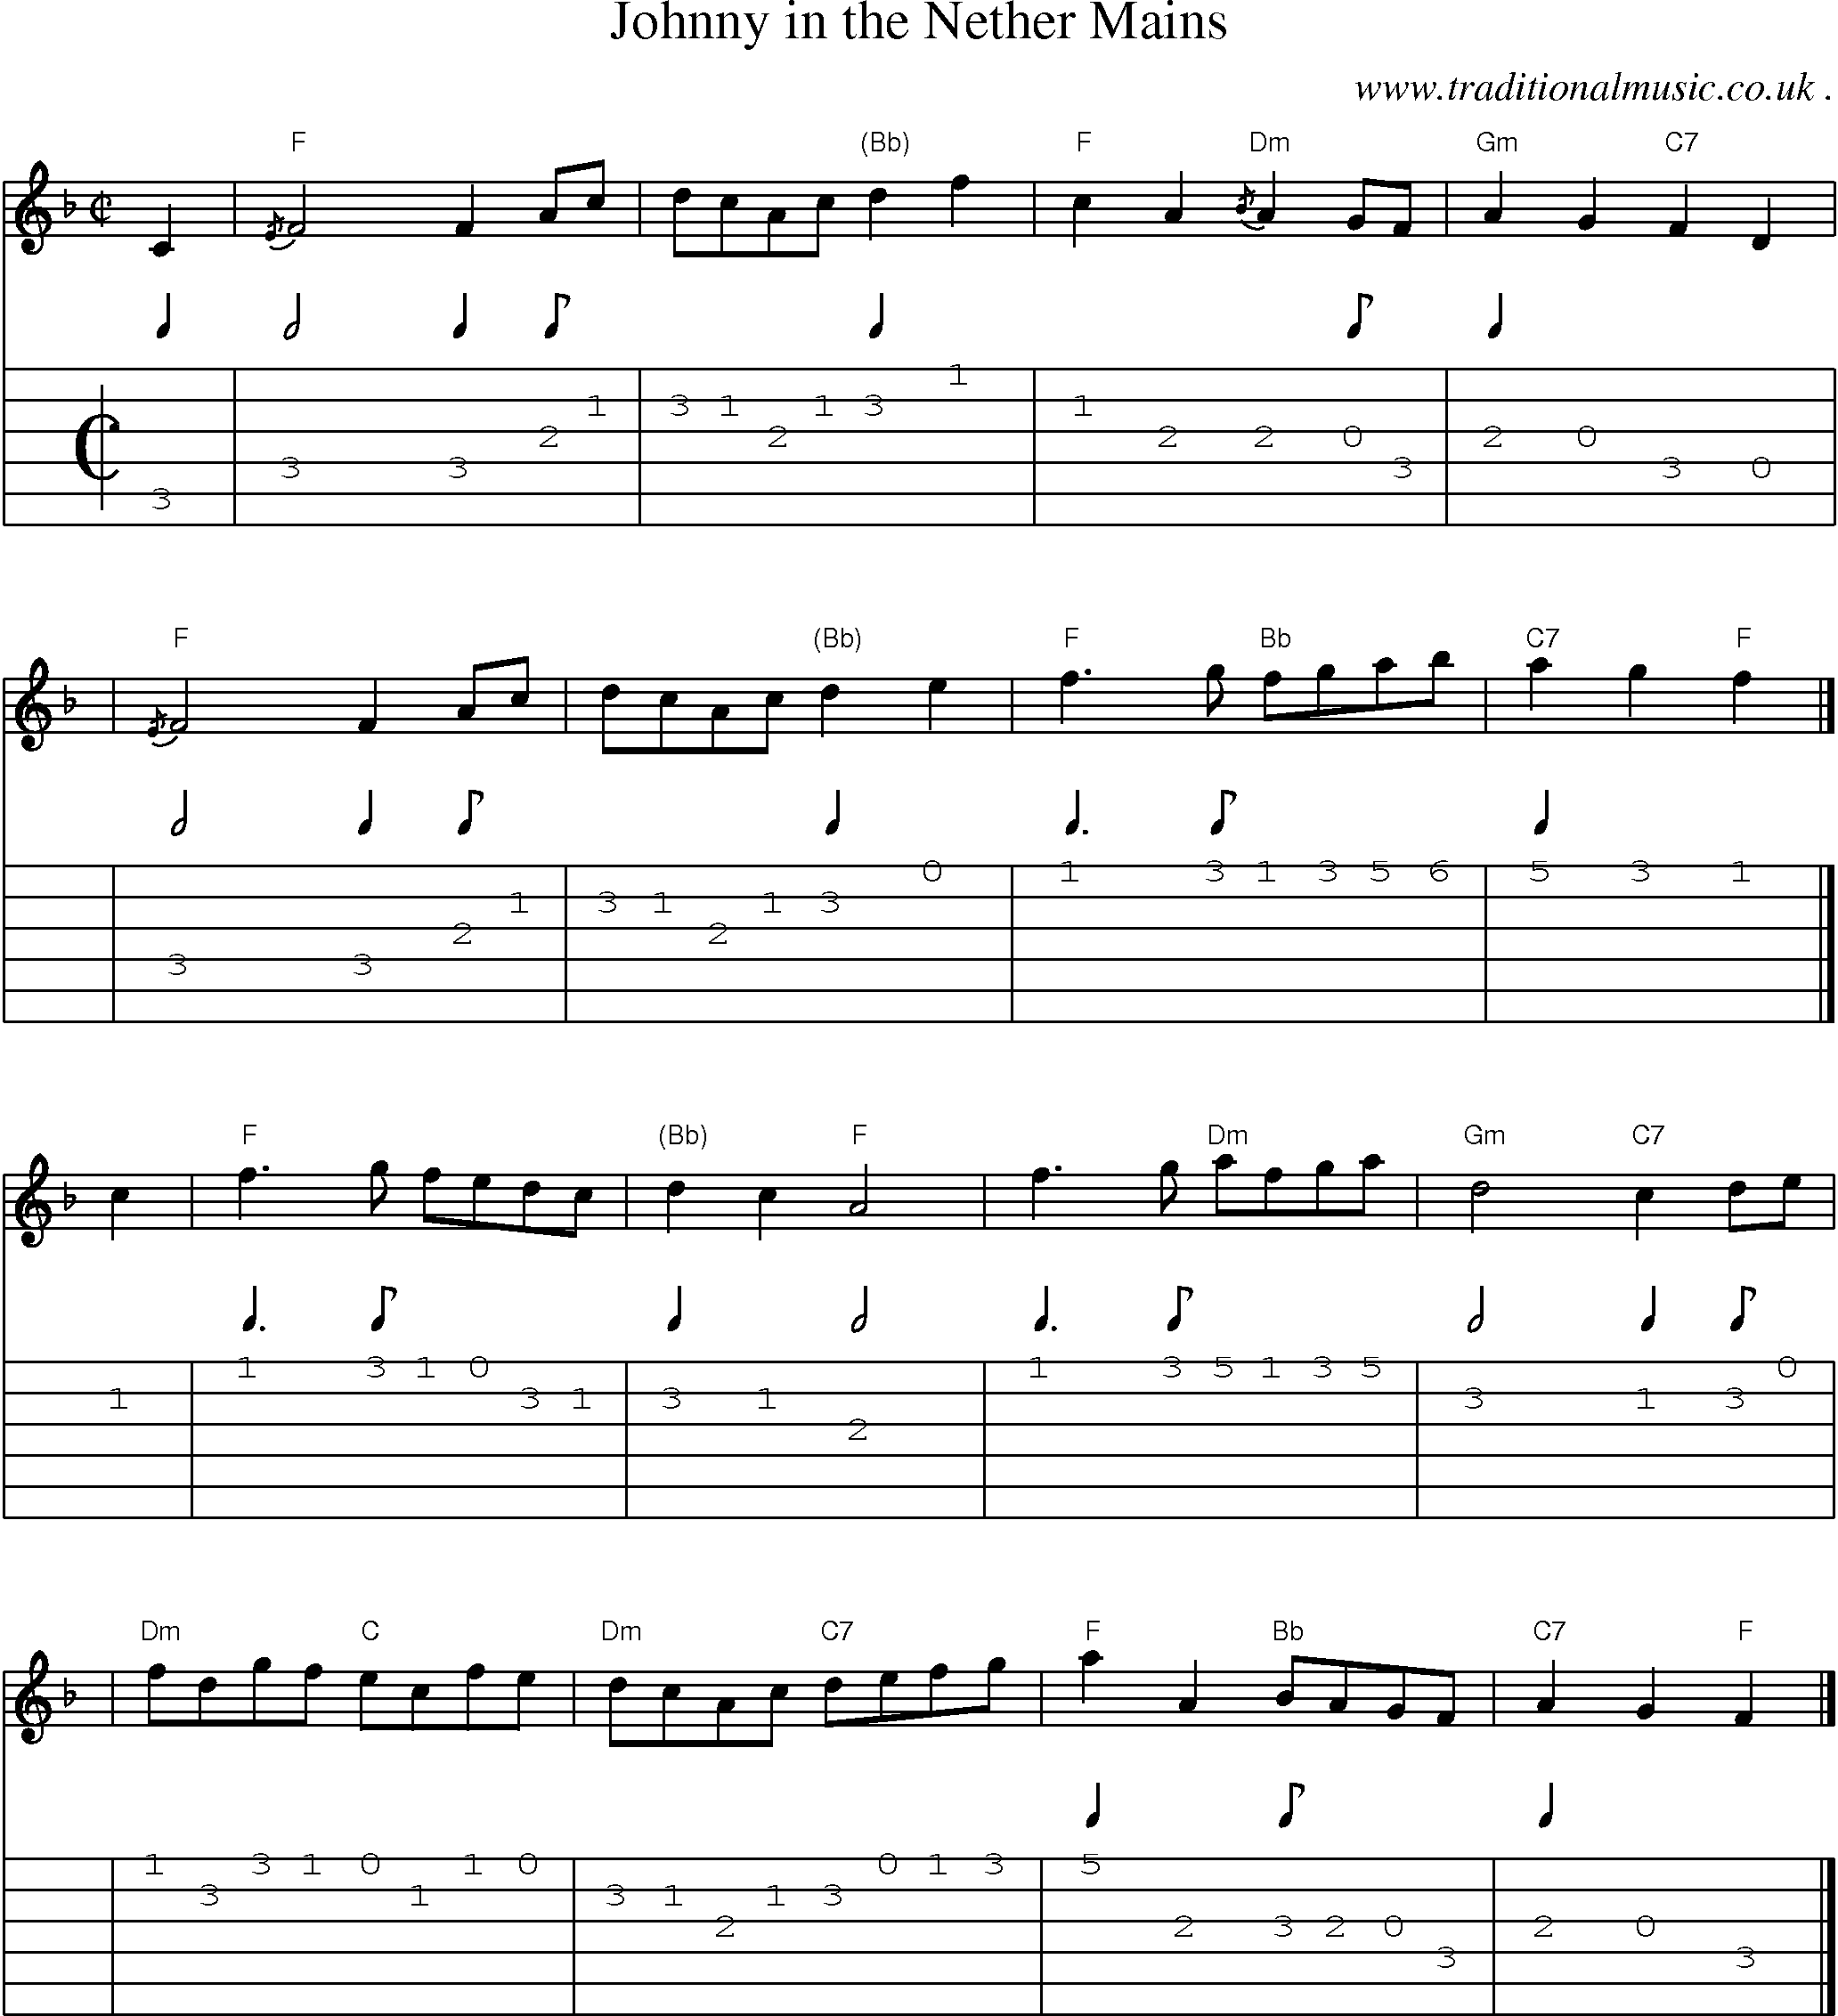 Sheet-music  score, Chords and Guitar Tabs for Johnny In The Nether Mains